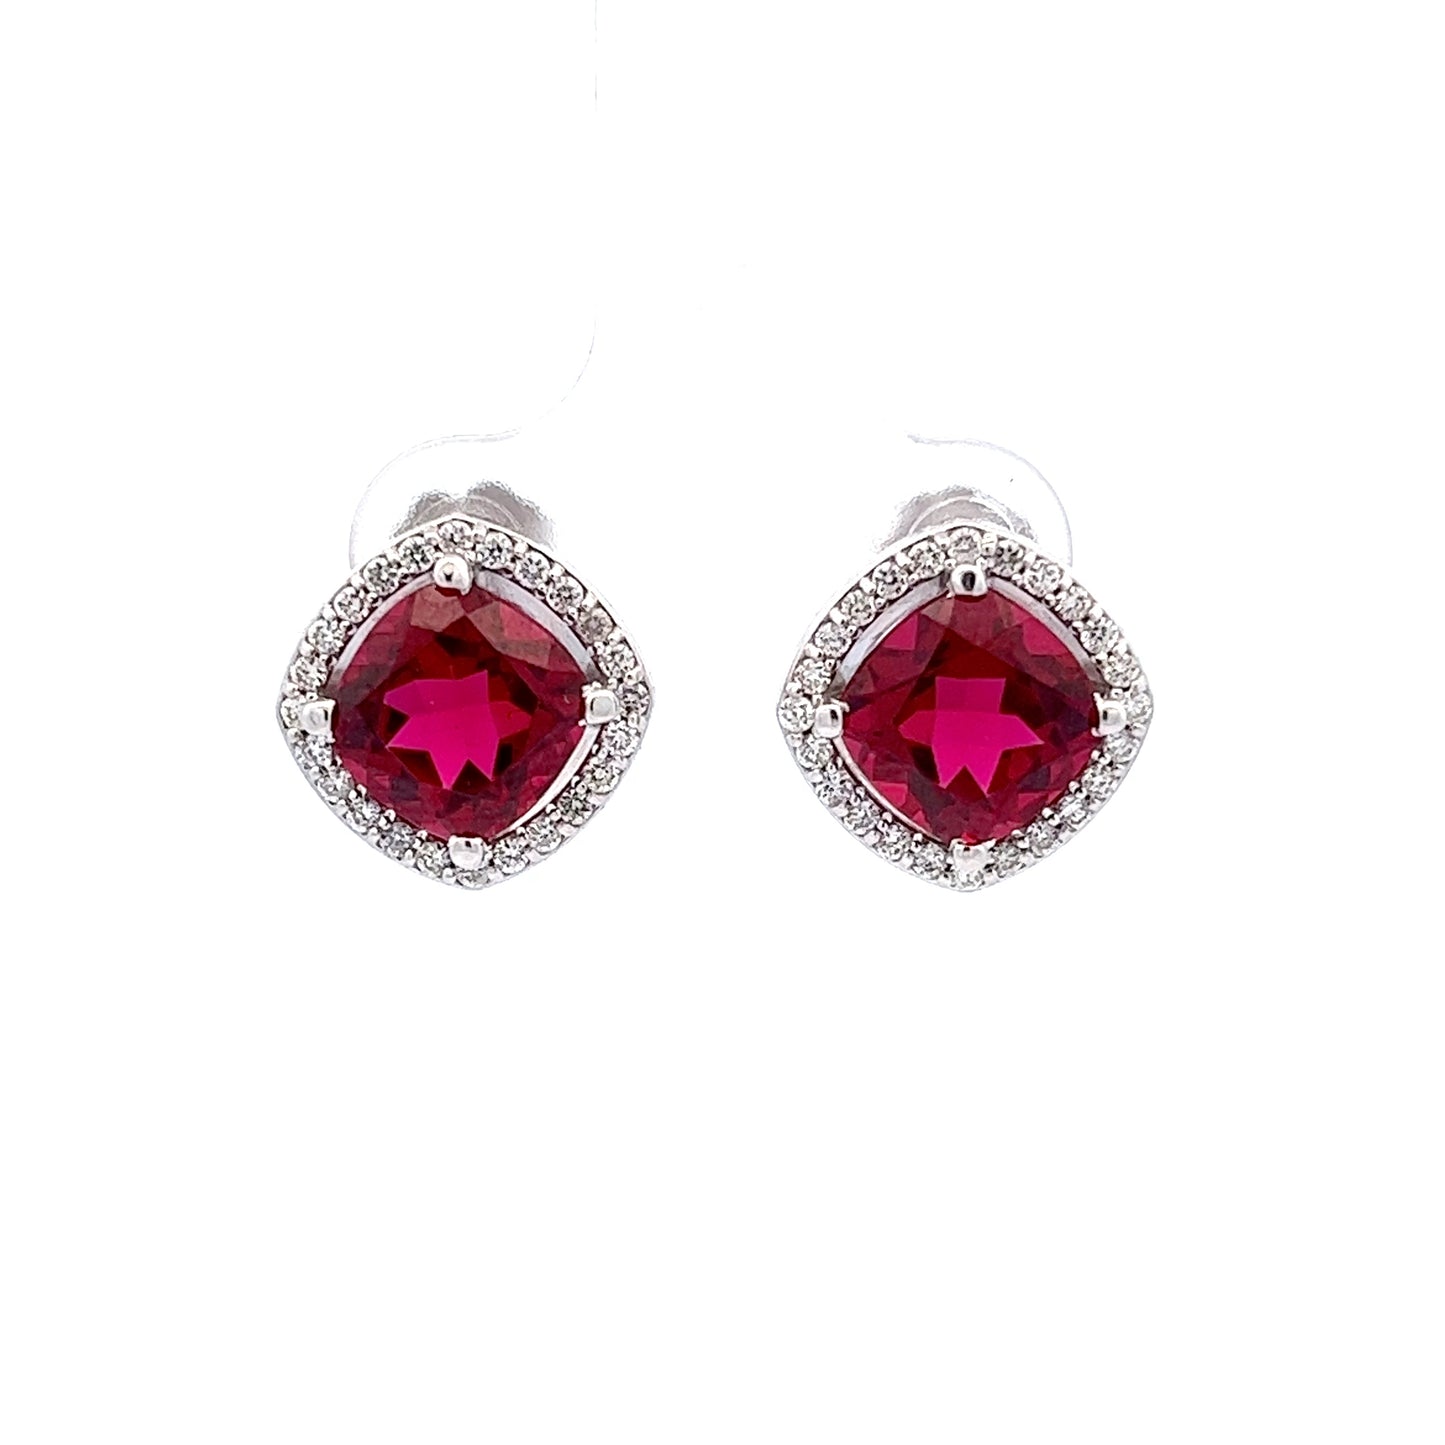 4.79ct total weight ruby and diamond earrings